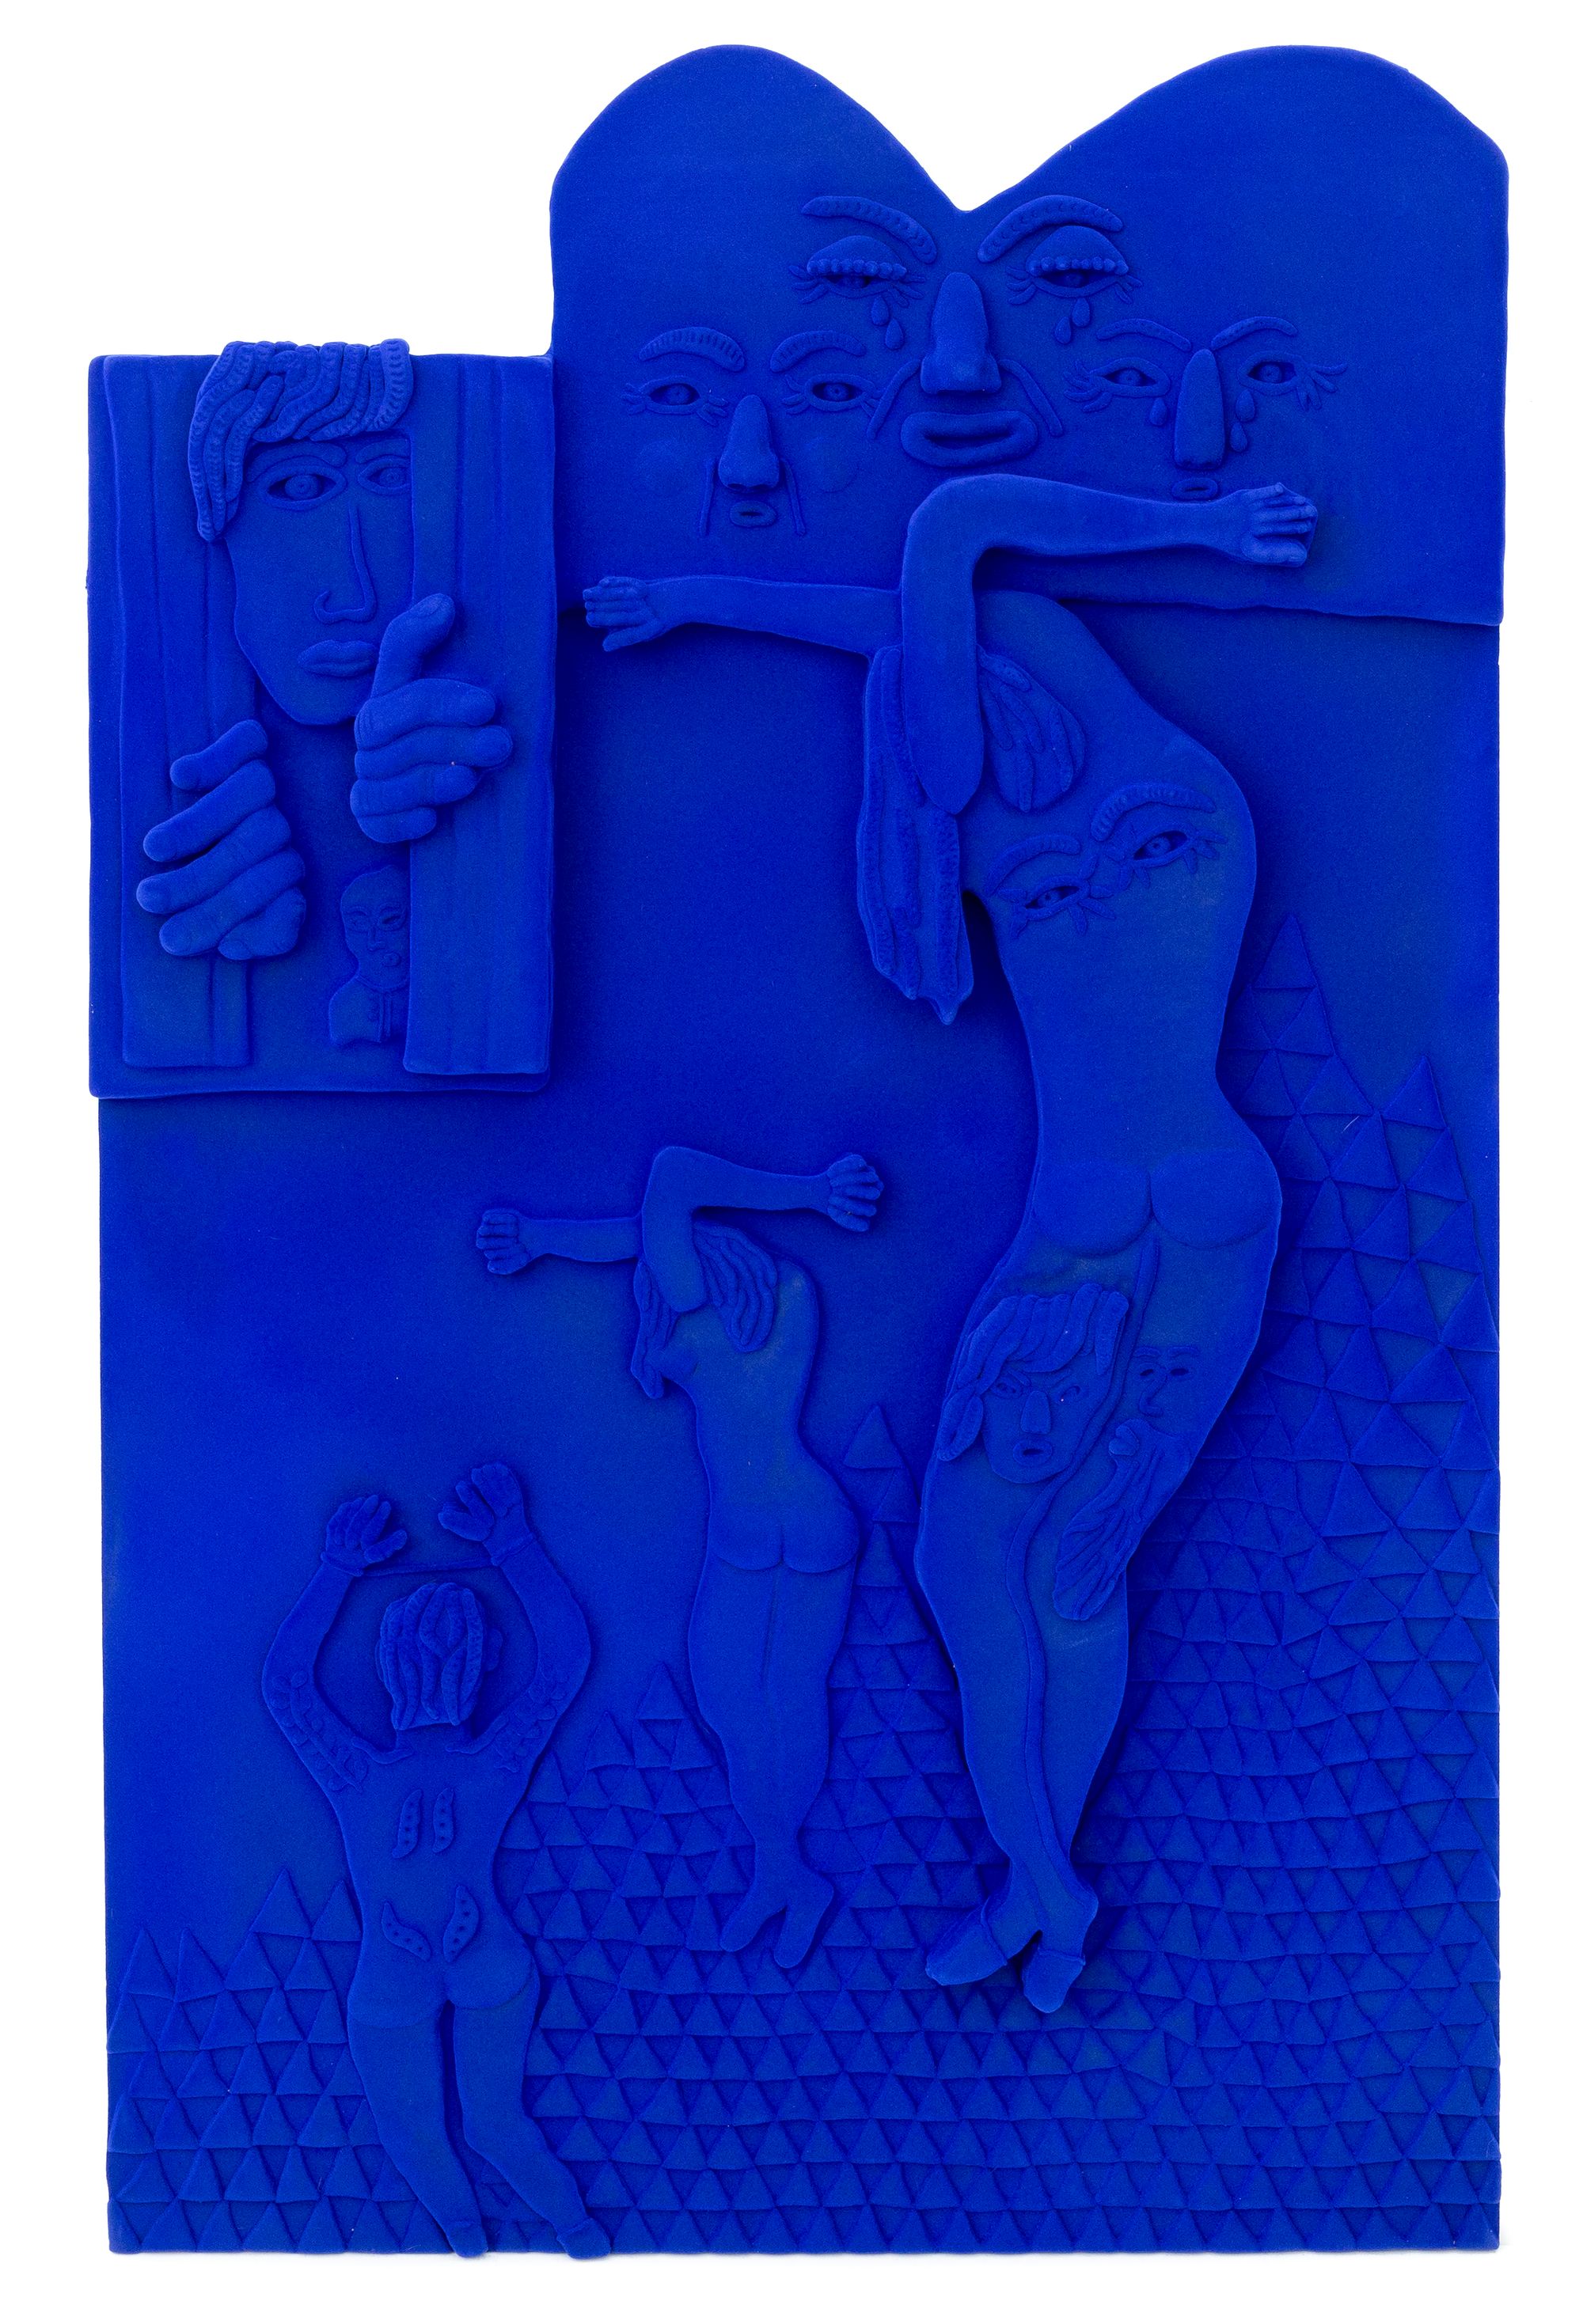 A royal blue flocked relief of epoxy resin has the look of velvet and depicts a mythic scene of three figures who are merged together through their facial and hair features.